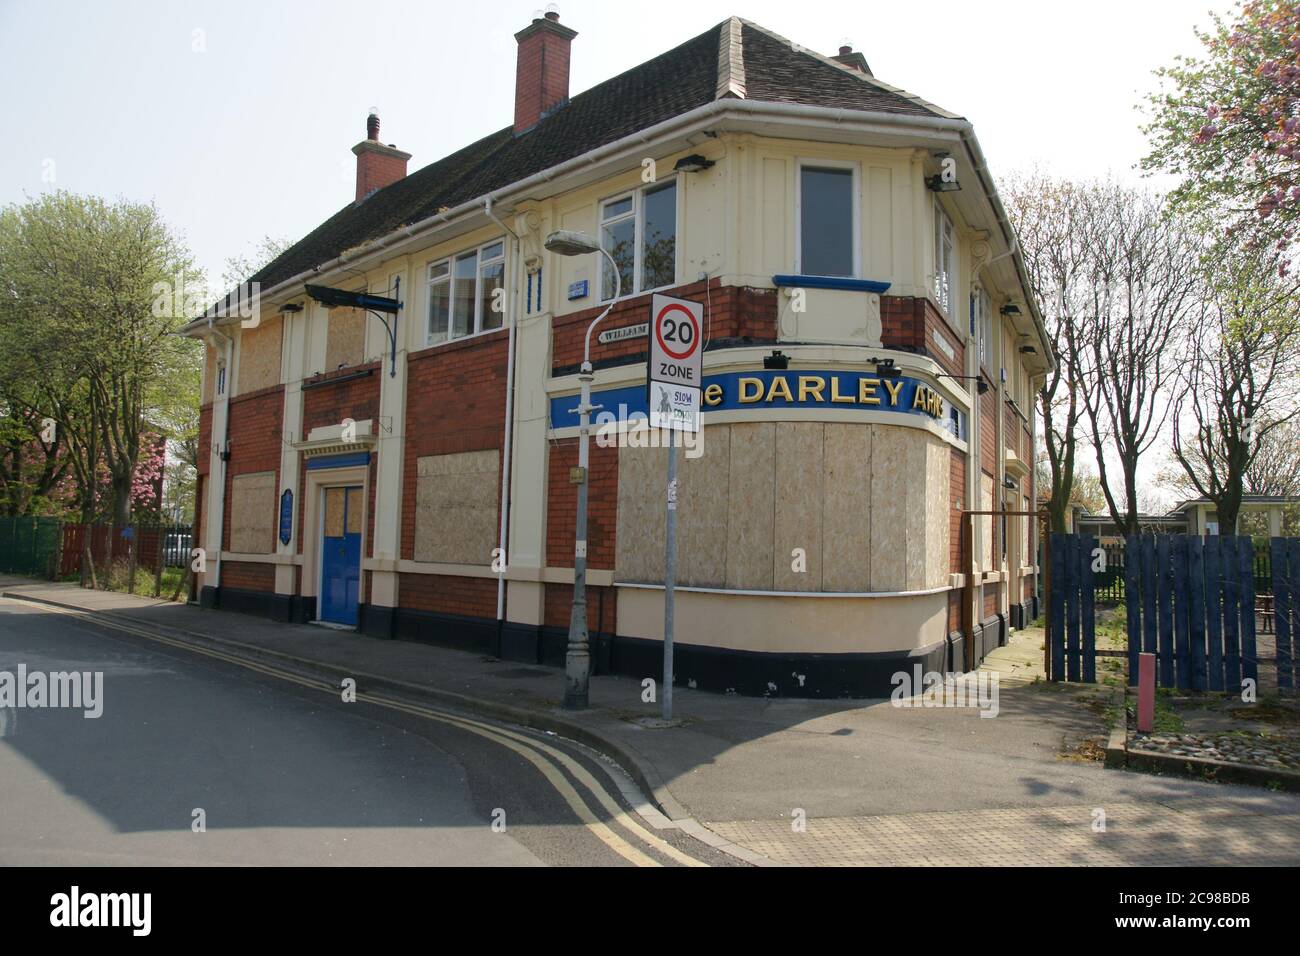 Kingston upon Hull, Run down derelict Pub, The Darley Arms Banque D'Images